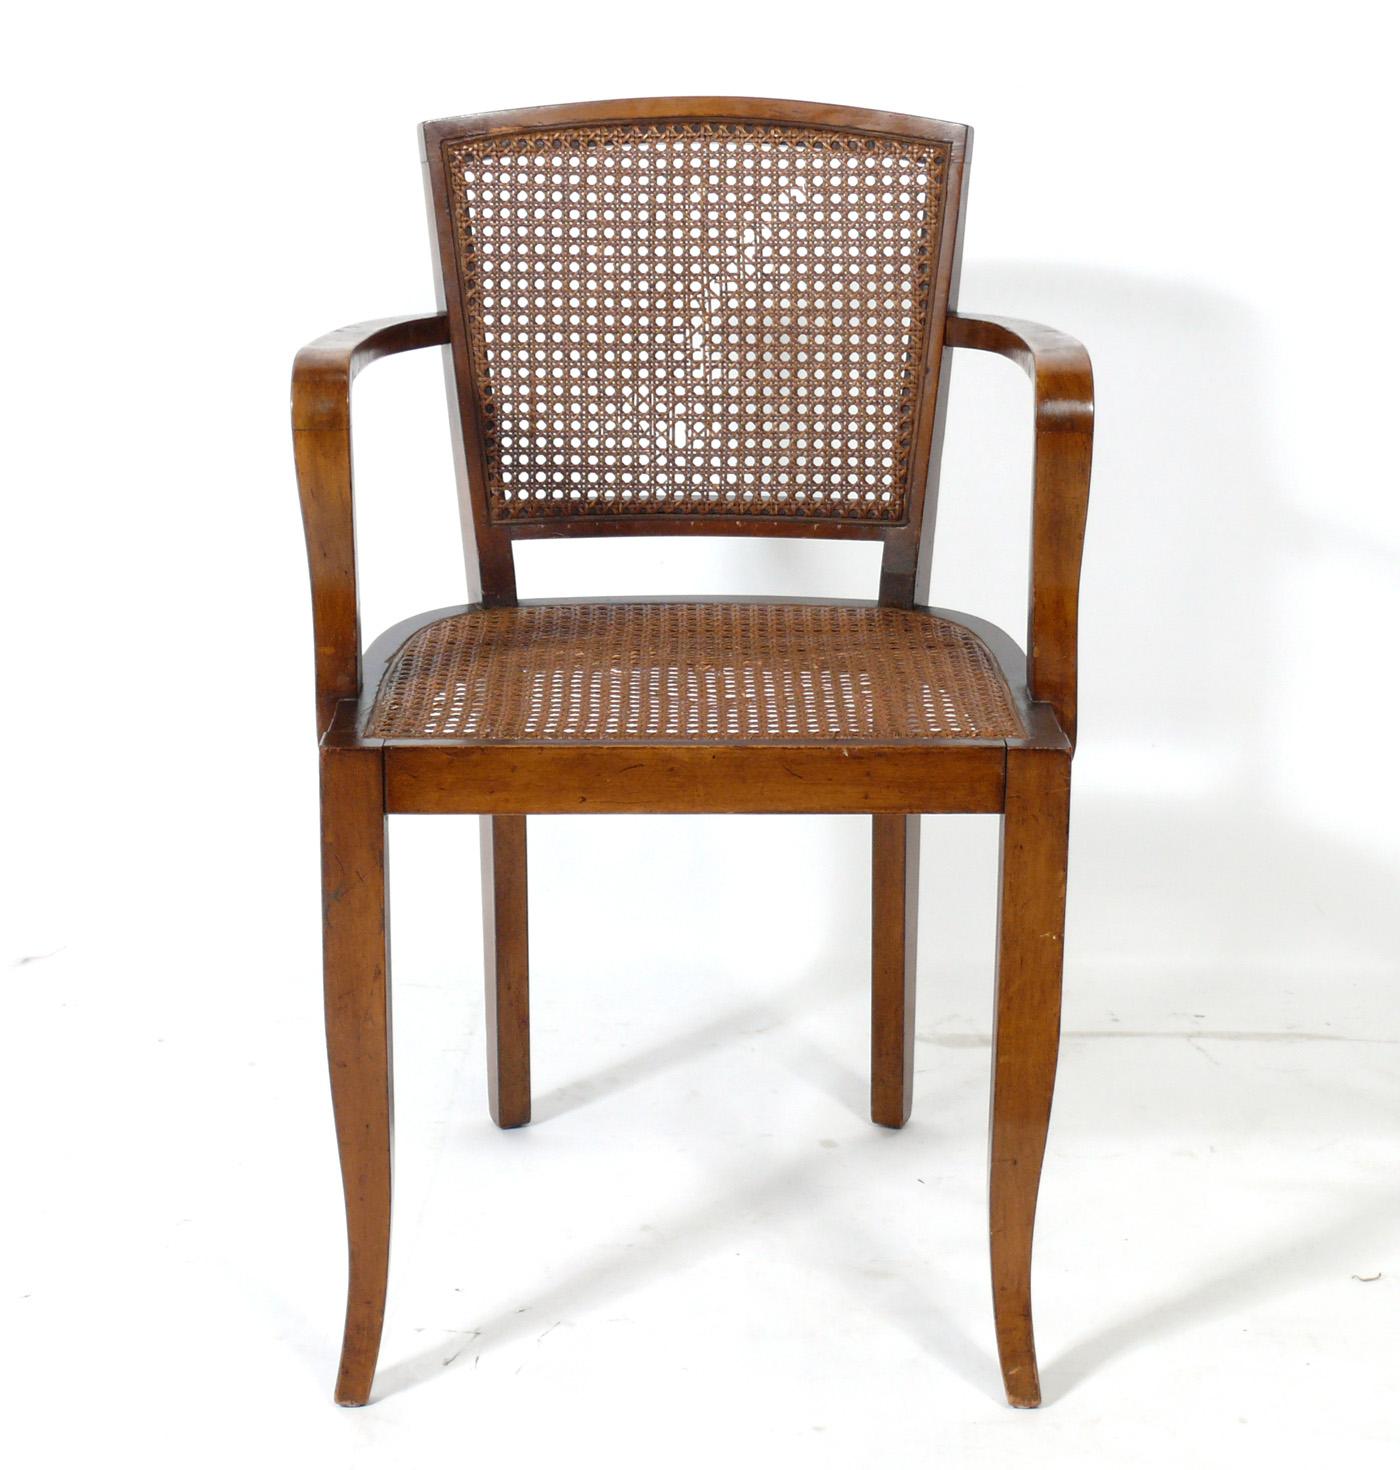 French Art Deco dining chairs, France, circa 1930s. These chairs are currently being completely restored and can be completed in your choice of finish color. We can re-do the cane, or reupholster them in your fabric for no additional charge. The